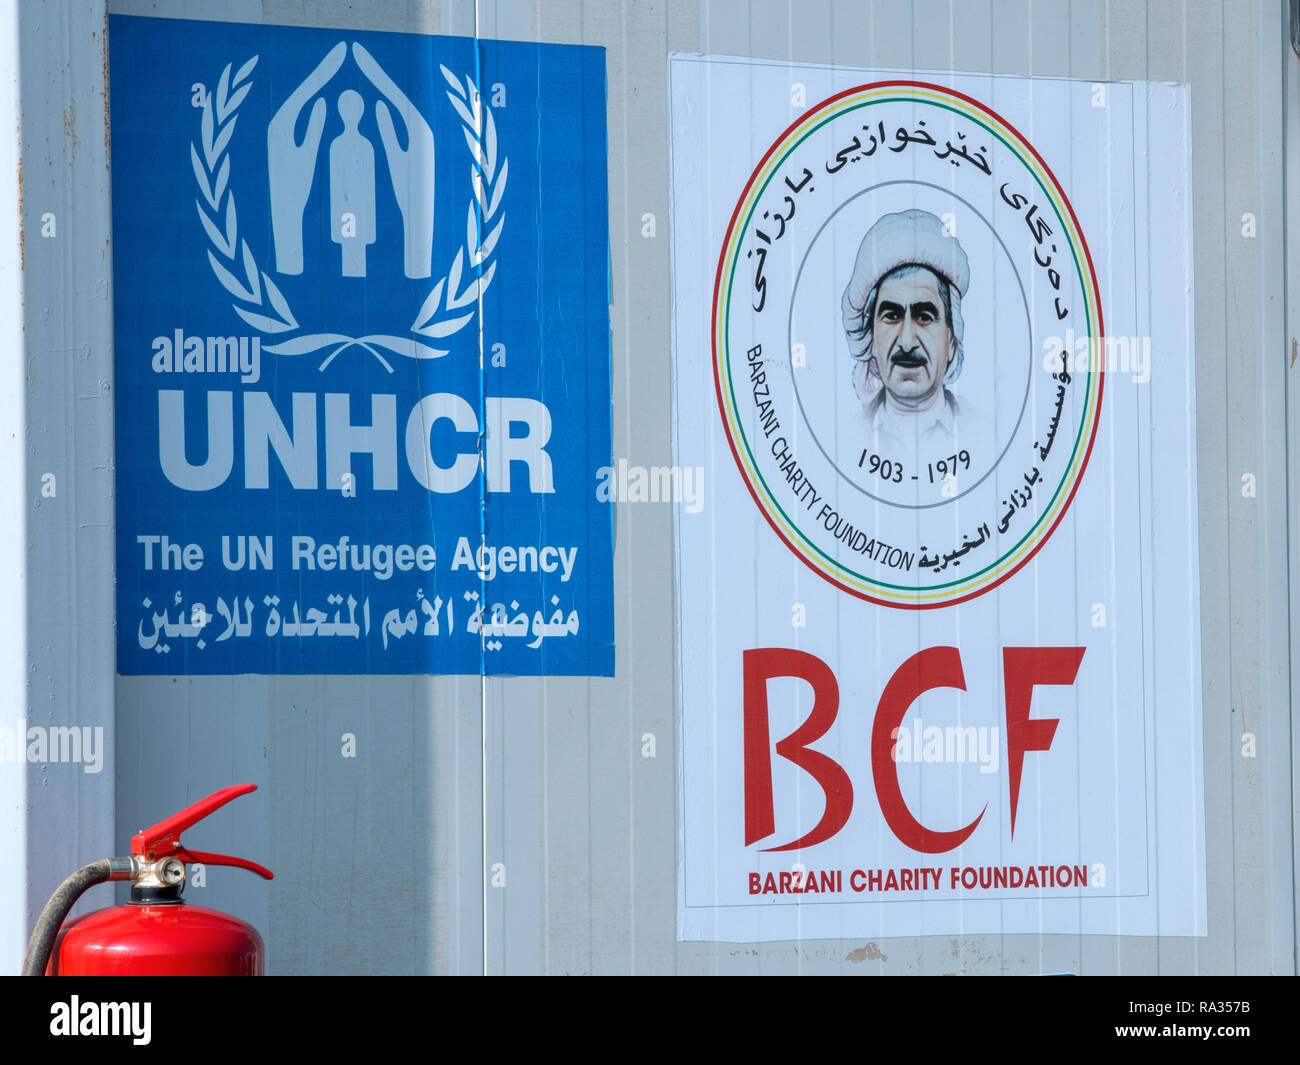 Hasan Sham, Iraq. 19th Dec, 2018. The signs of the UN refugee organisation UNHCR and the non-profit organisation Barzani Charity Foundation (BCF), founded in Erbil in 2005, are mounted at the entrance to the refugee camp Hasan Sham at a barrack. The tent camp near the largely destroyed former IS stronghold of Mossul accommodates 3,300 of the 1.8 million internally displaced persons in Iraq. Credit: Jens Büttner/dpa-Zentralbild/ZB/dpa/Alamy Live News Stock Photo